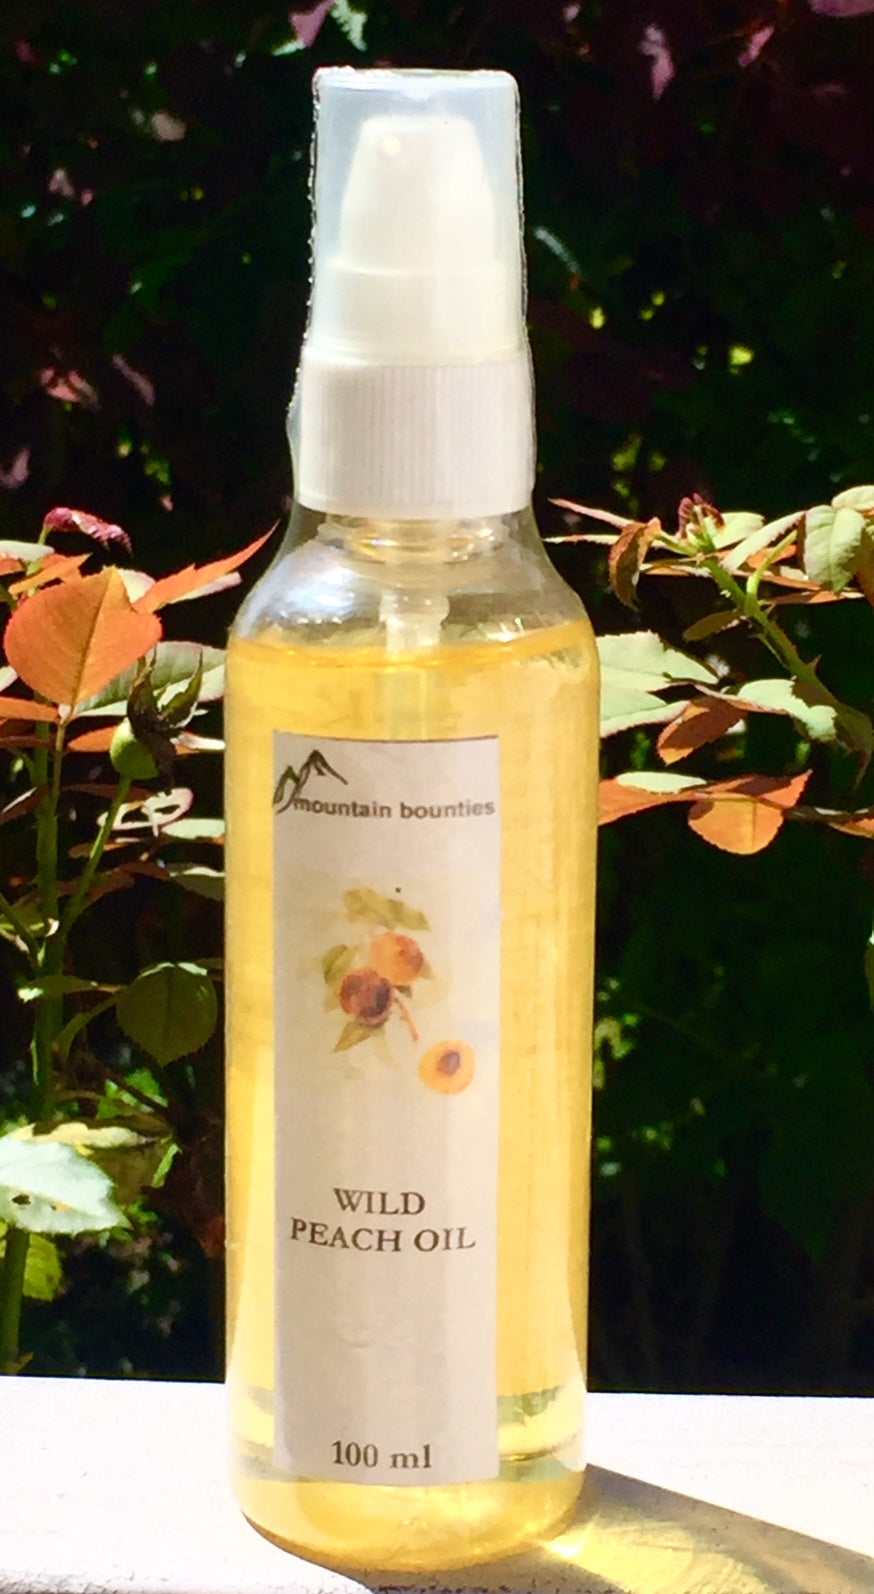 Wild Peach oil is an excellent softener and moisturizer for face, hands and hair. Well known therapeutic body massage oil. Recommended for prematurely aged, sensitive, inflamed and dry skin. Cold pressed oil from Peach kernels. Body Oil, 100% natural, handmade, Natural oils, Skin Care, Himachal Oils, Himalayan Salt, Mountain Bounties, Himalayan people Care, Essential oils, Cold Pressed oils, Moisturising oils, Moisturising creams